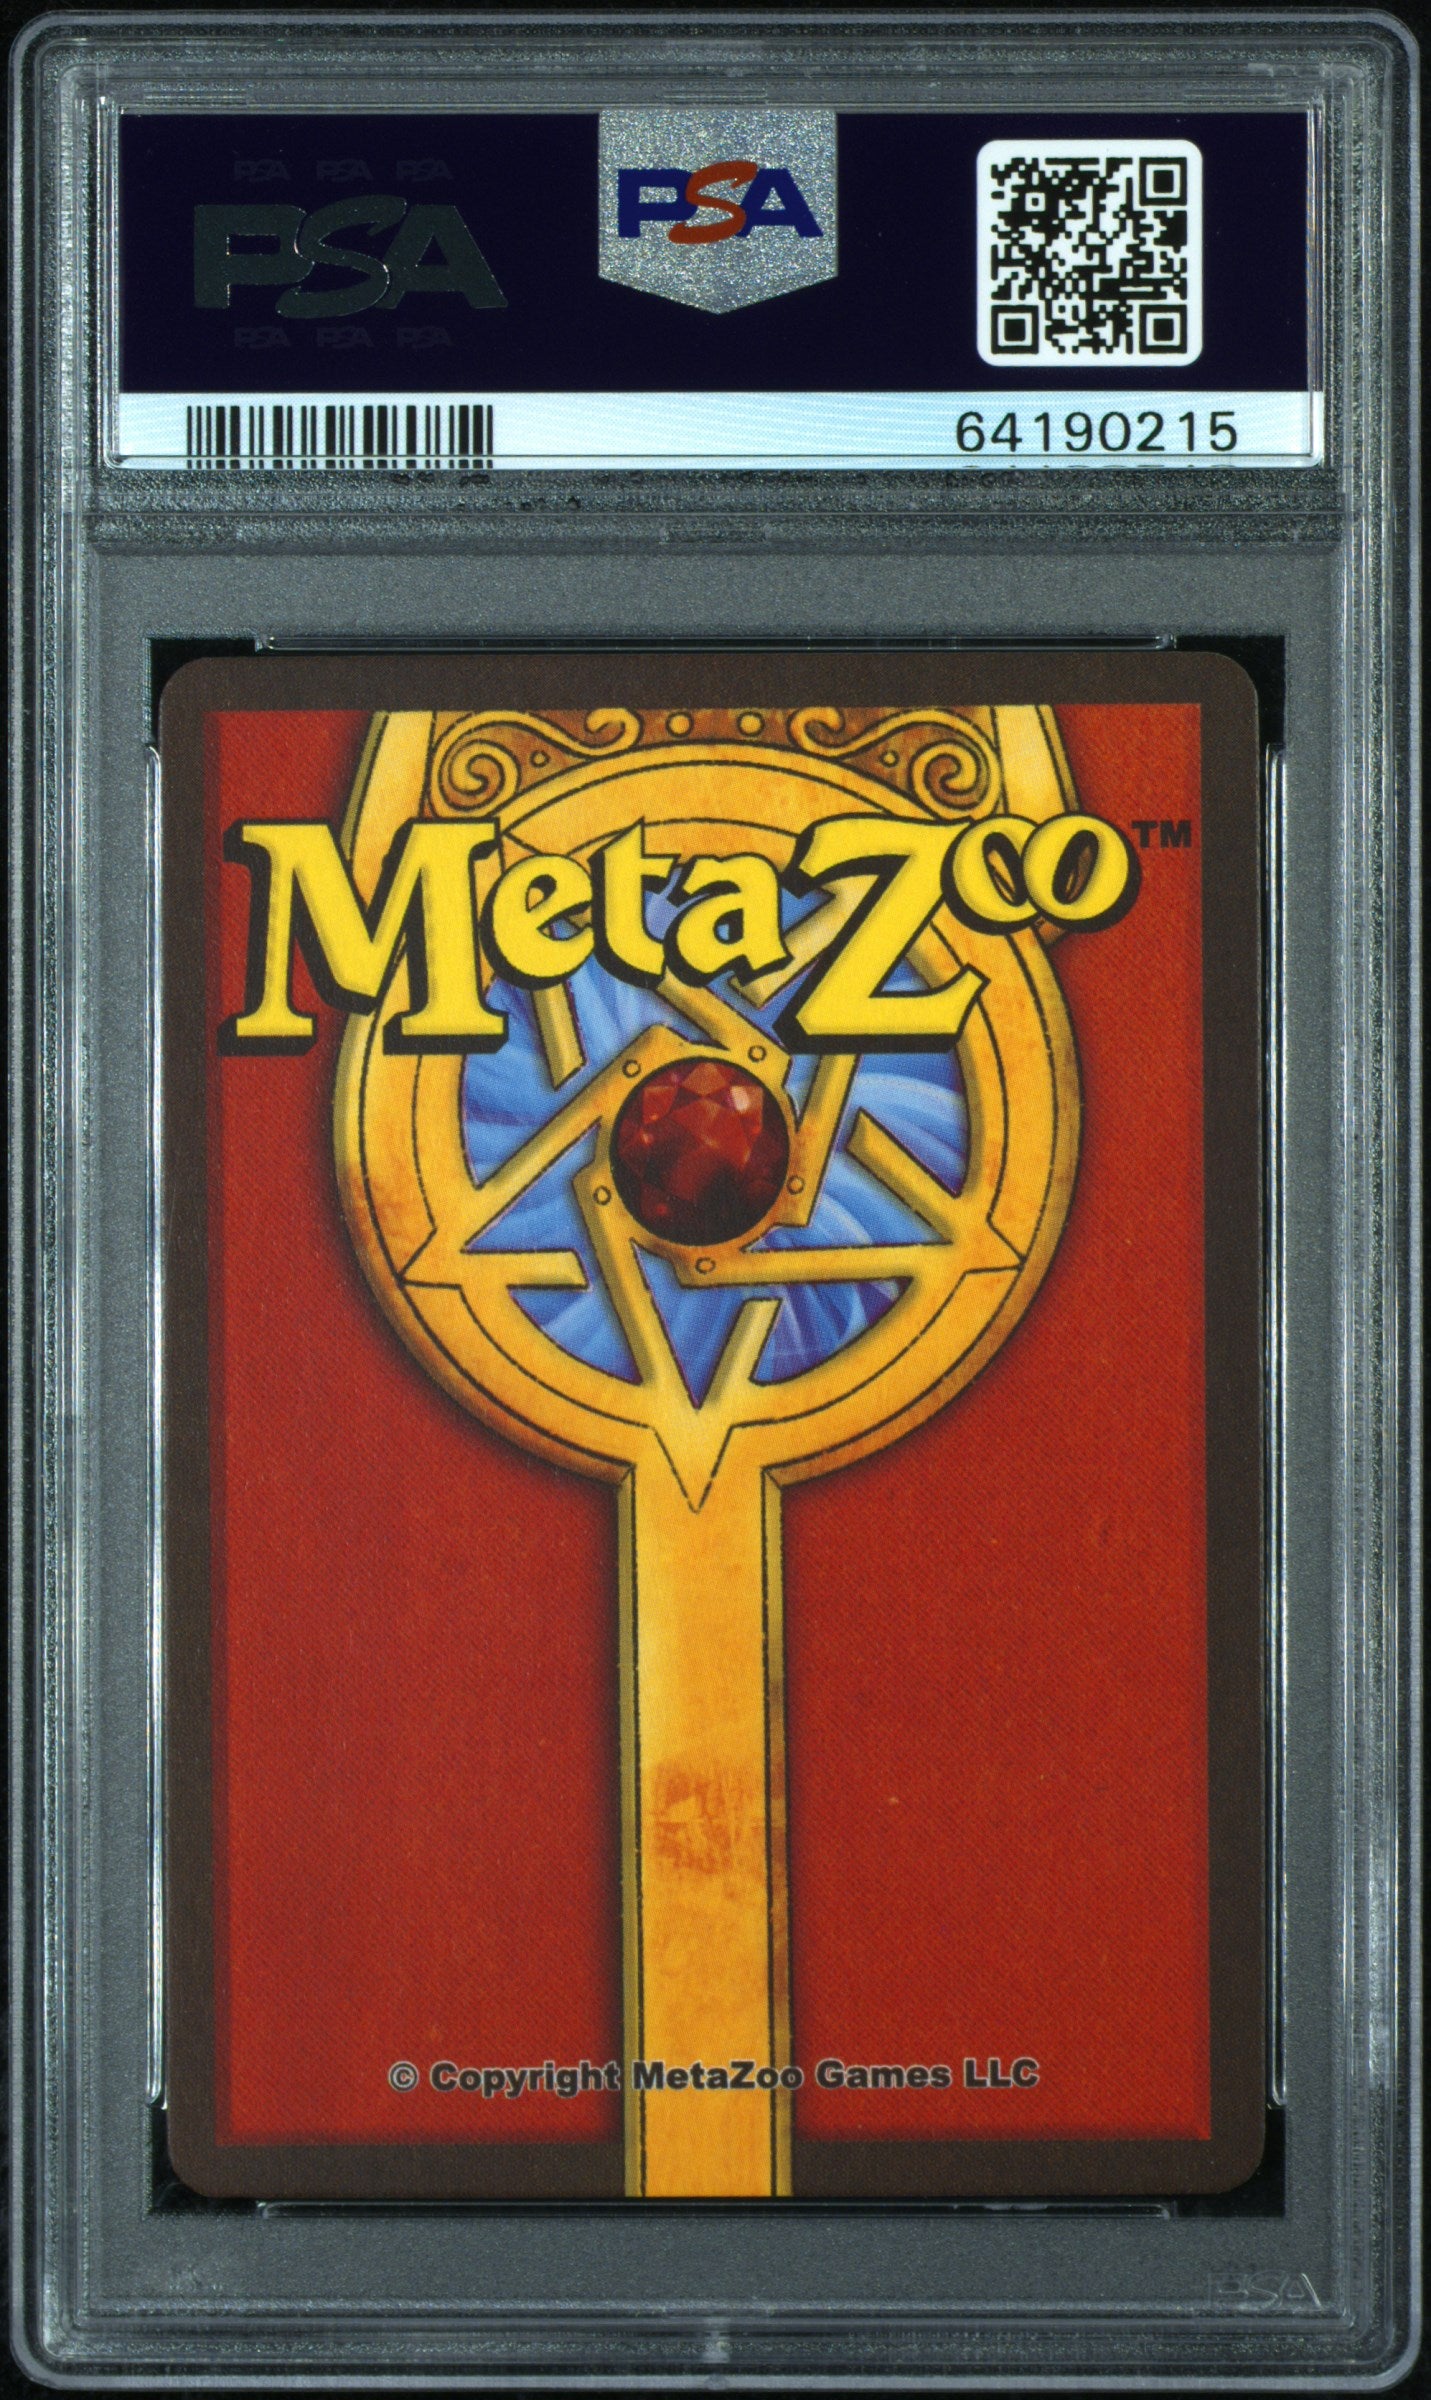 PSA 10: MetaZoo Wilderness 1st Edition - Awful Full Holo